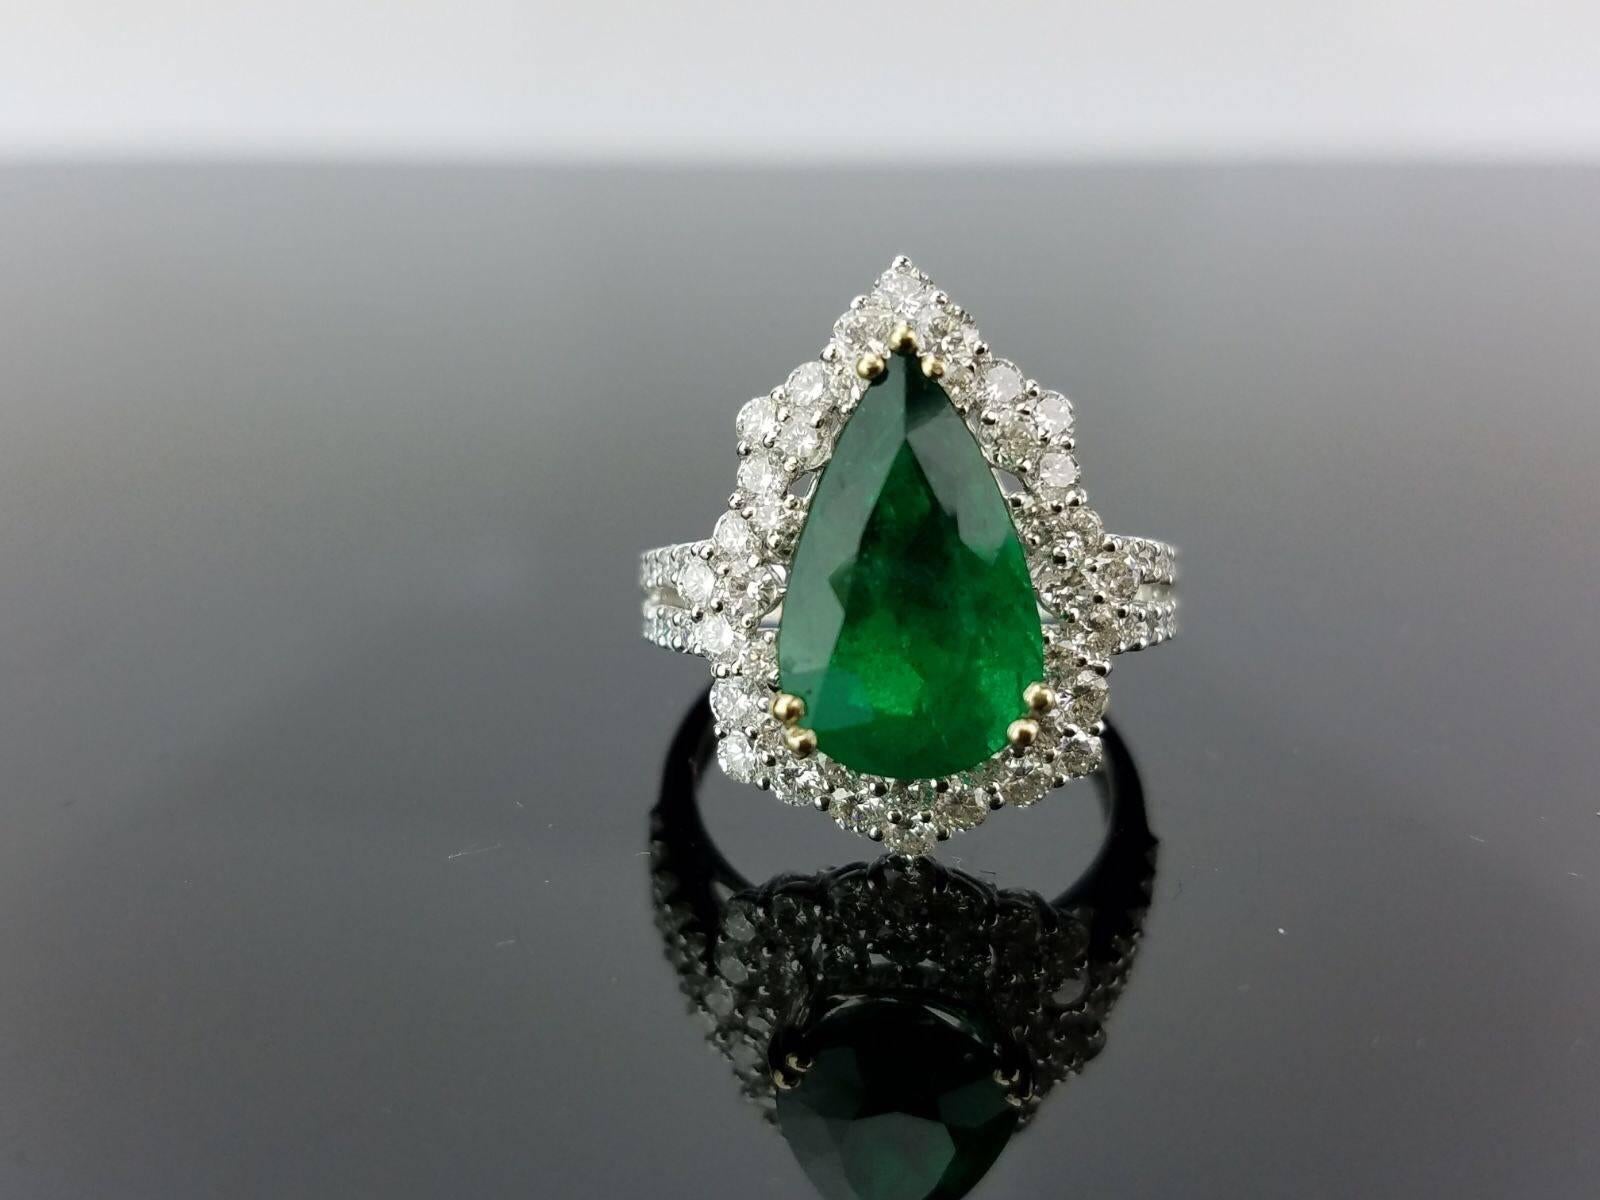 An elegant cocktail ring using high-quality Zambian Emerald of beautiful colour and White Diamond, all set in 18K white gold. 

Stone Details: 
Stone: Zambian Emerald
Carat Weight: 3.36 Carat

Diamond Details: 
Total Carat Weight: 1.63